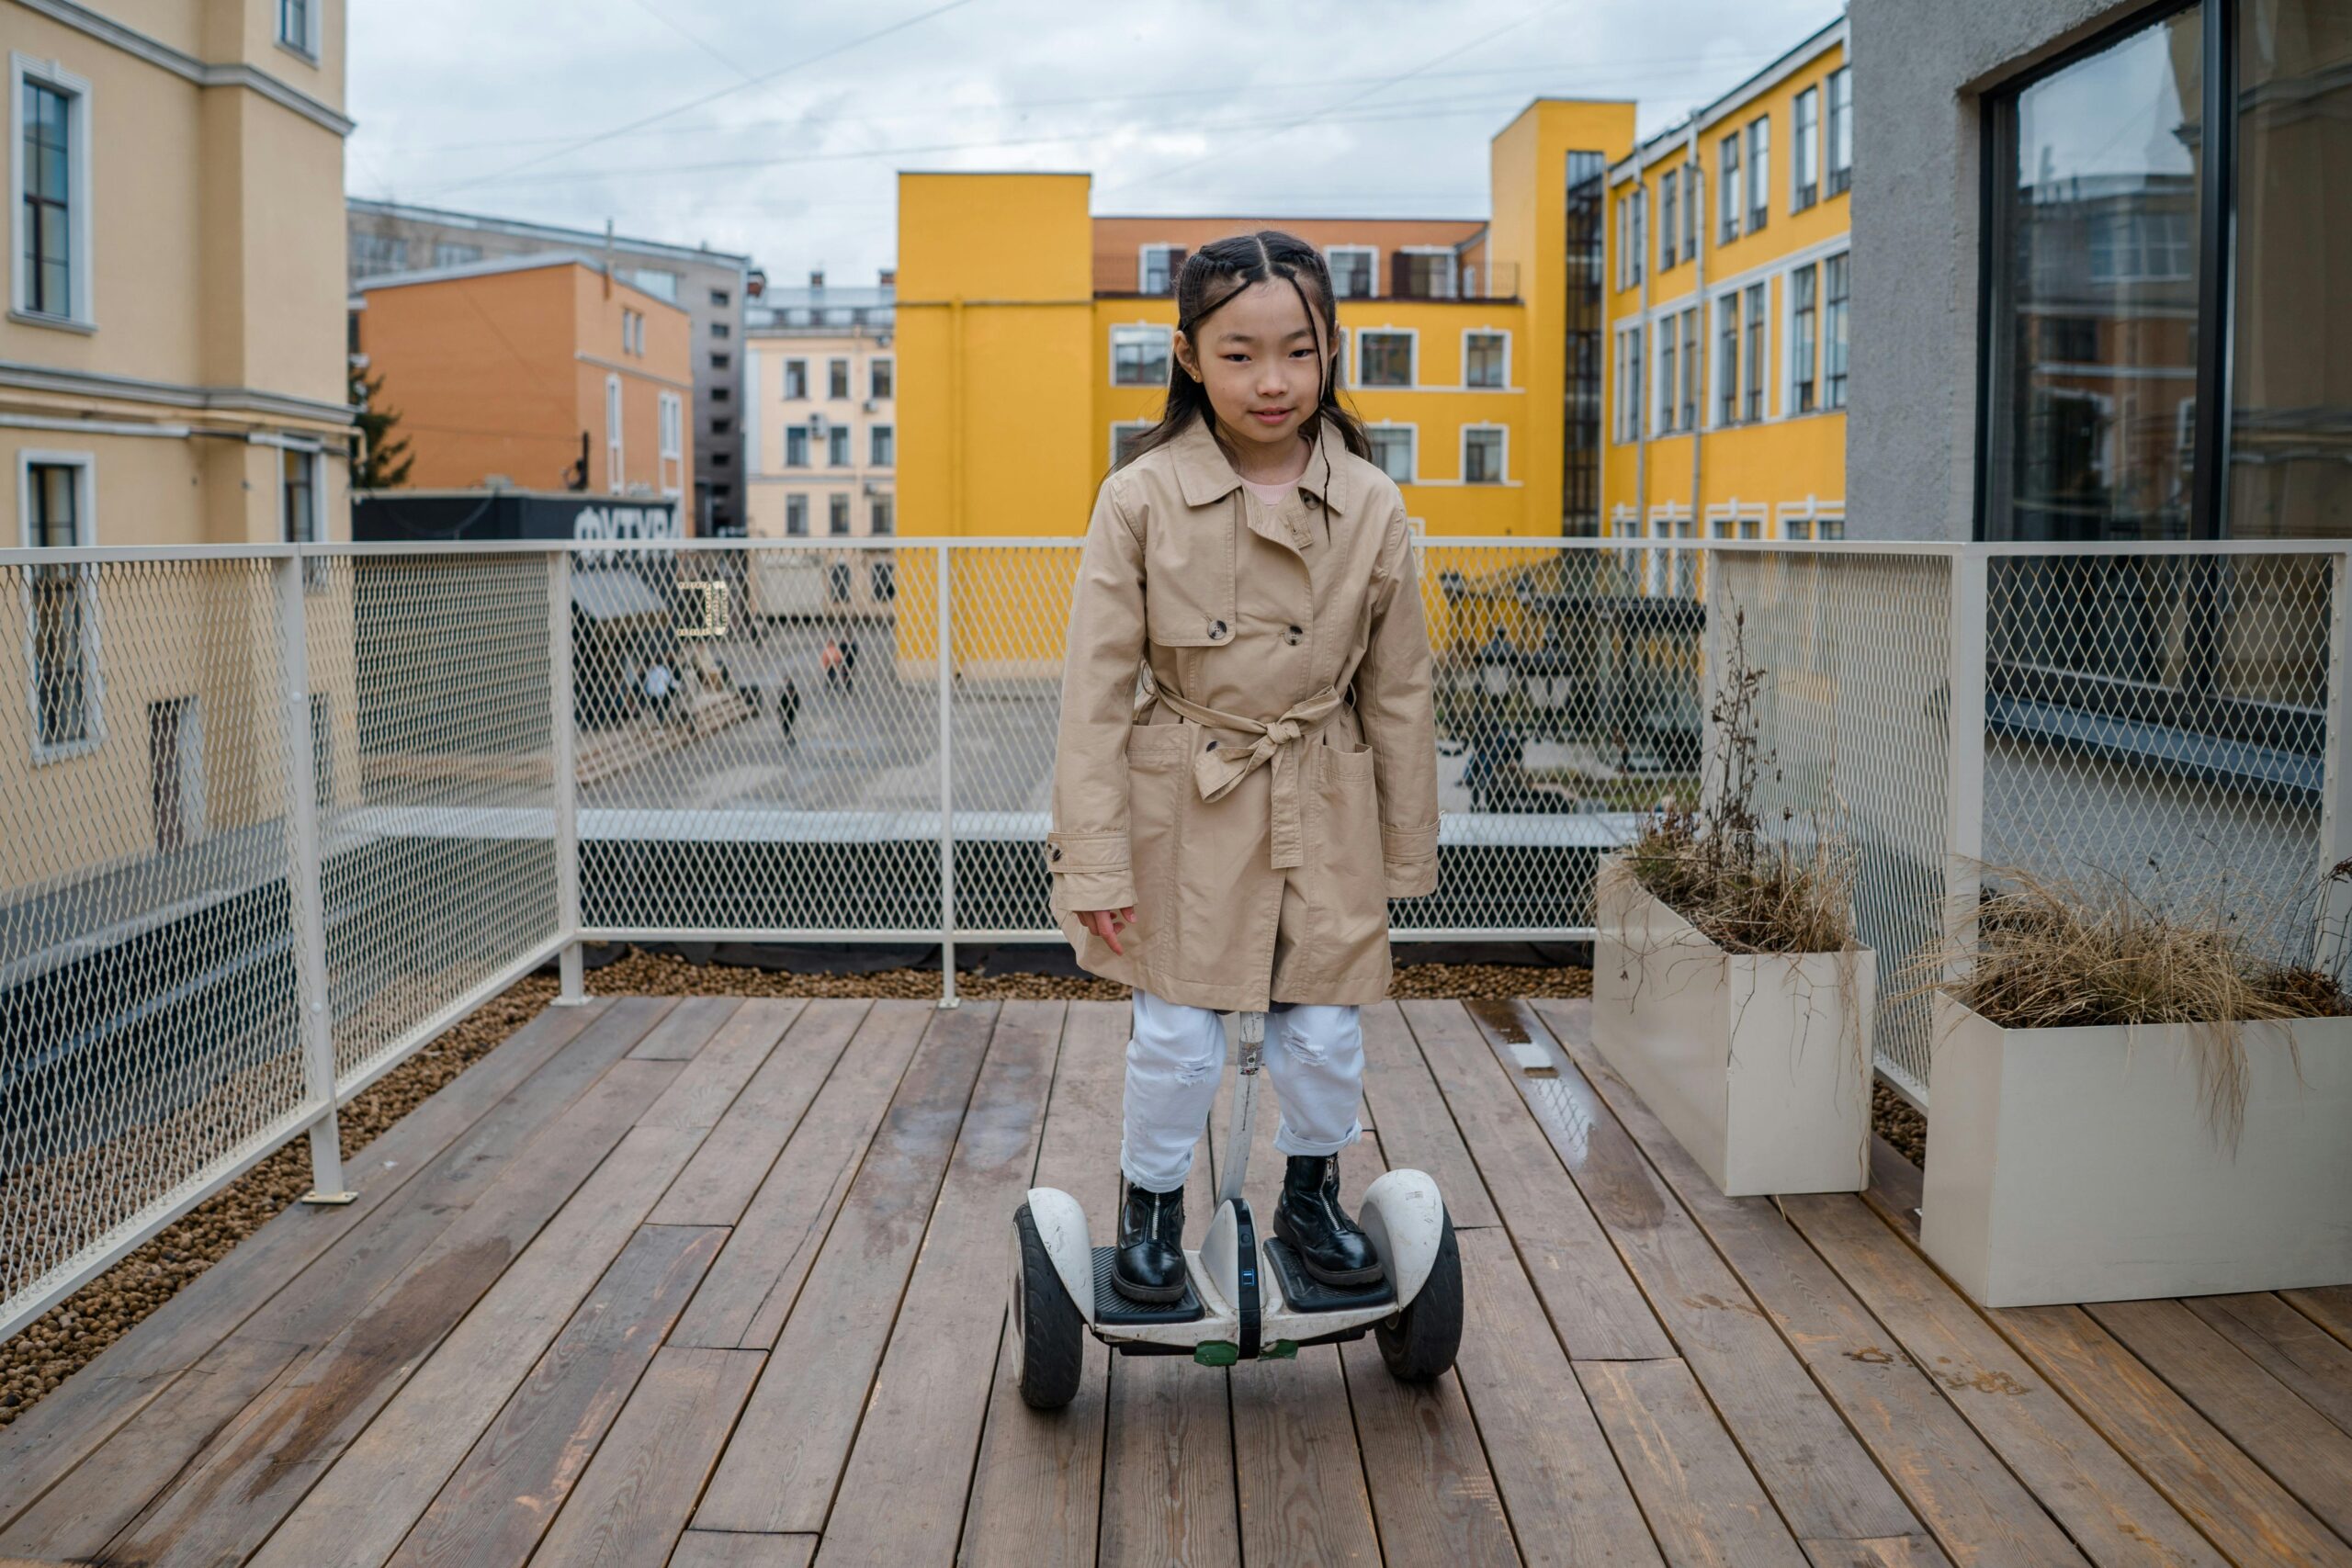 How Can You Determine the Weight Capacity of Your Hoverboard?